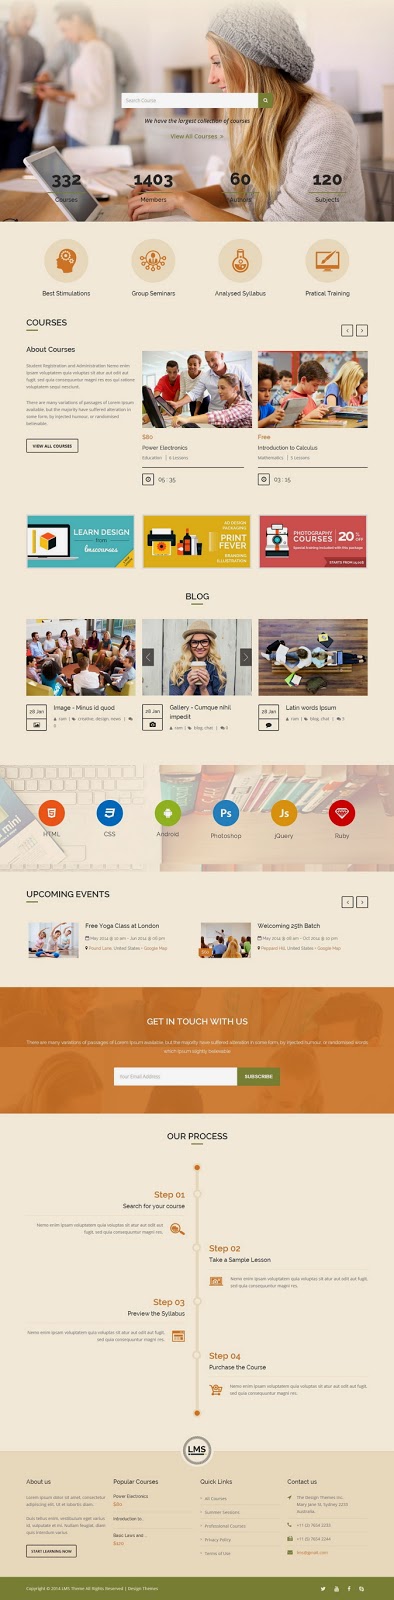 LMS Responsive Learning Management Theme